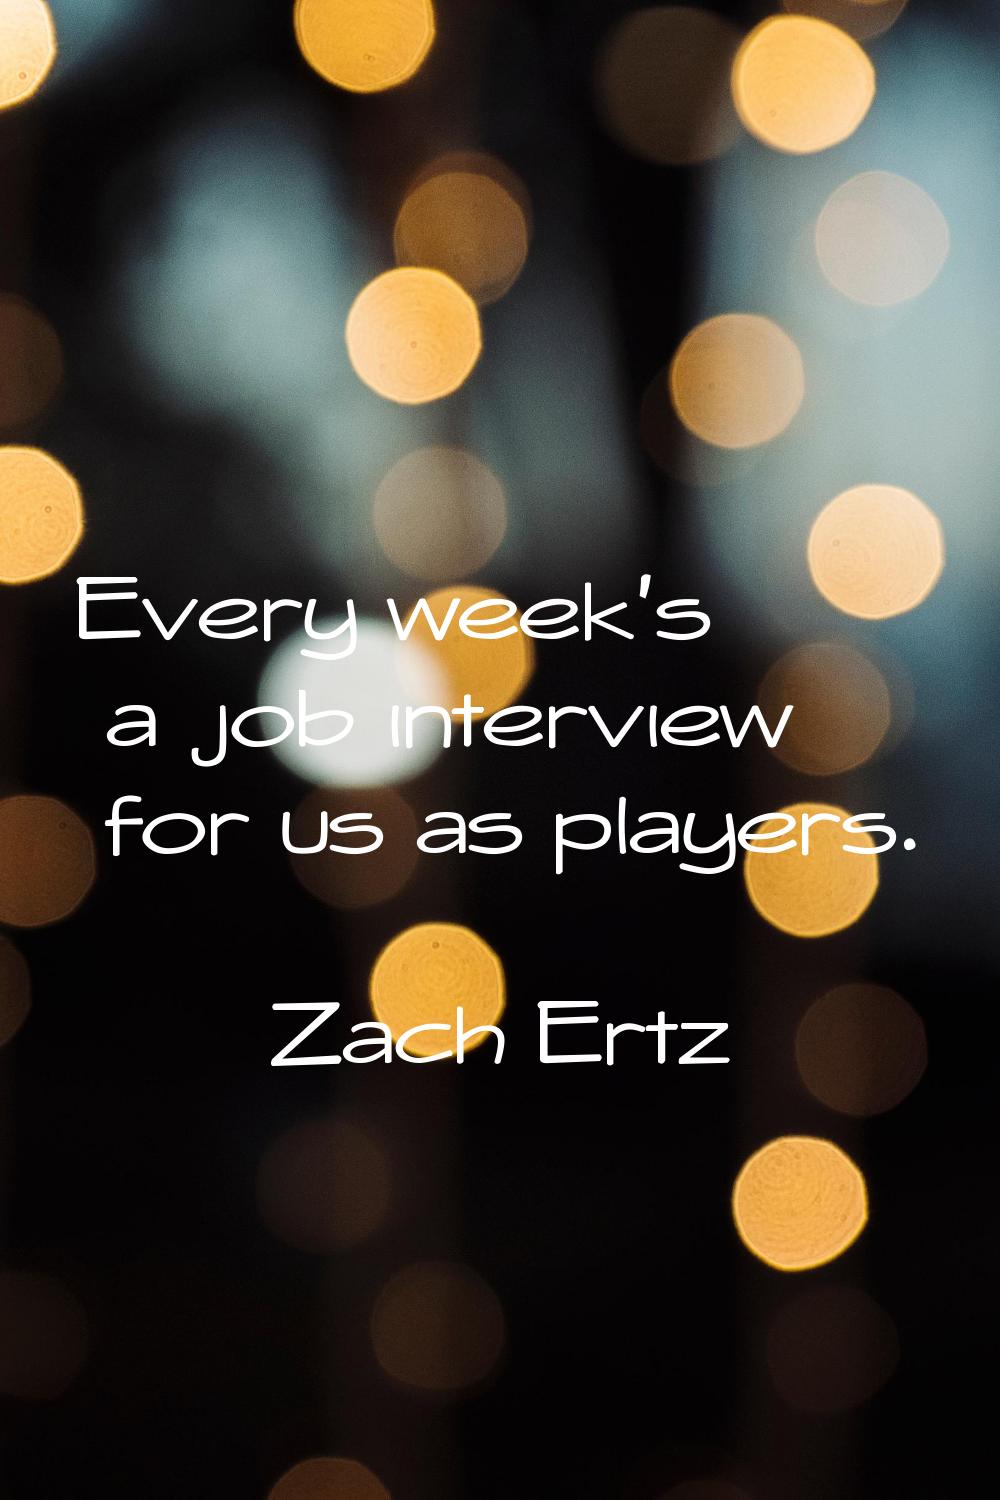 Every week's a job interview for us as players.